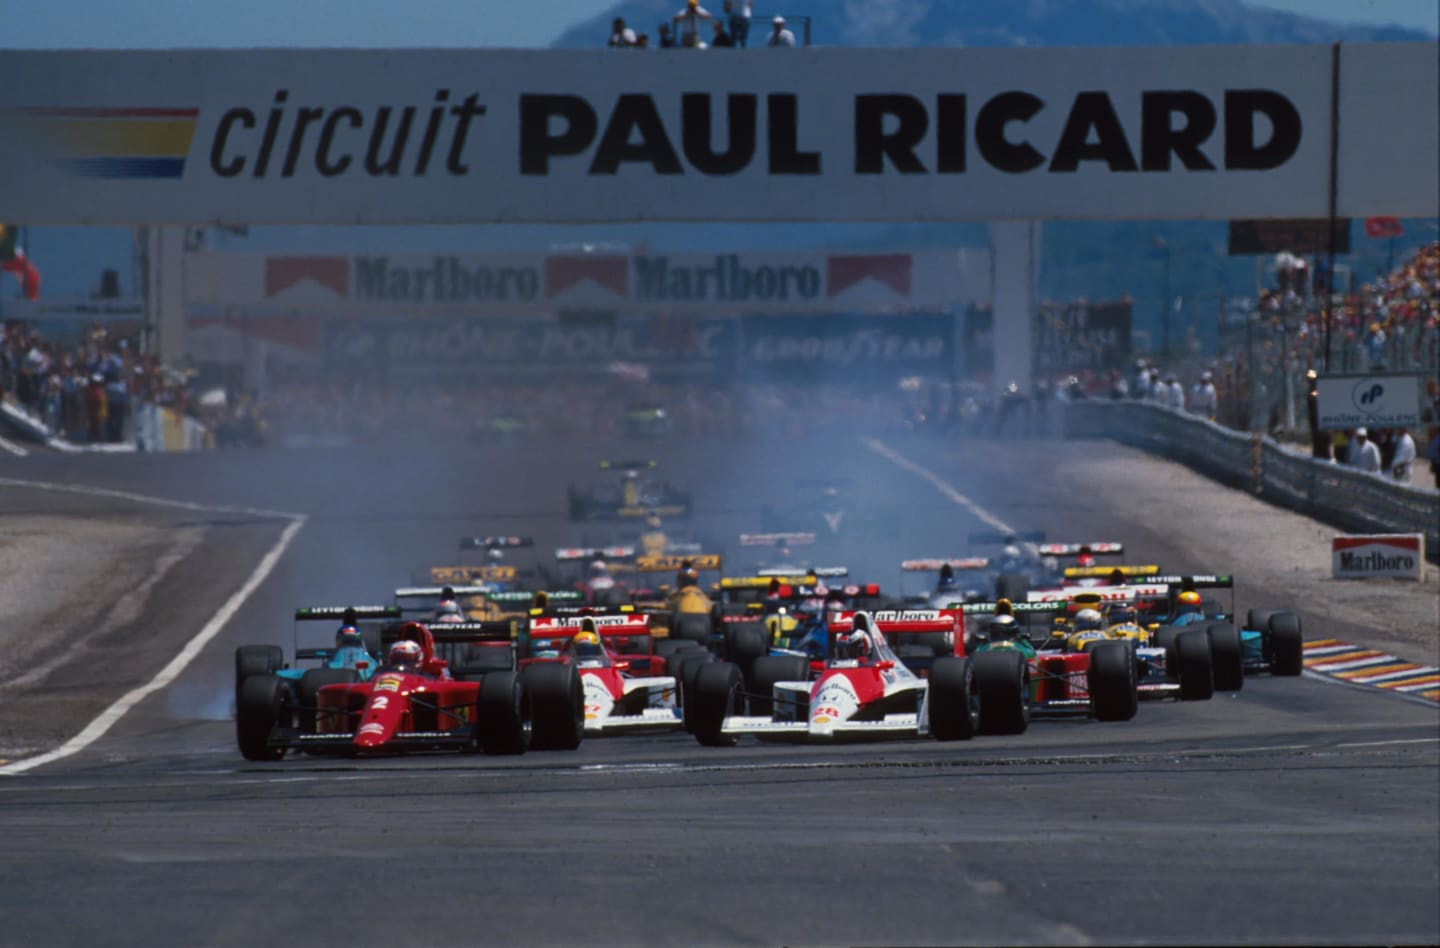 Nigel Mansell's Ferrari leads the pack in to the first corner
French GP, Paul Ricard, France, 8